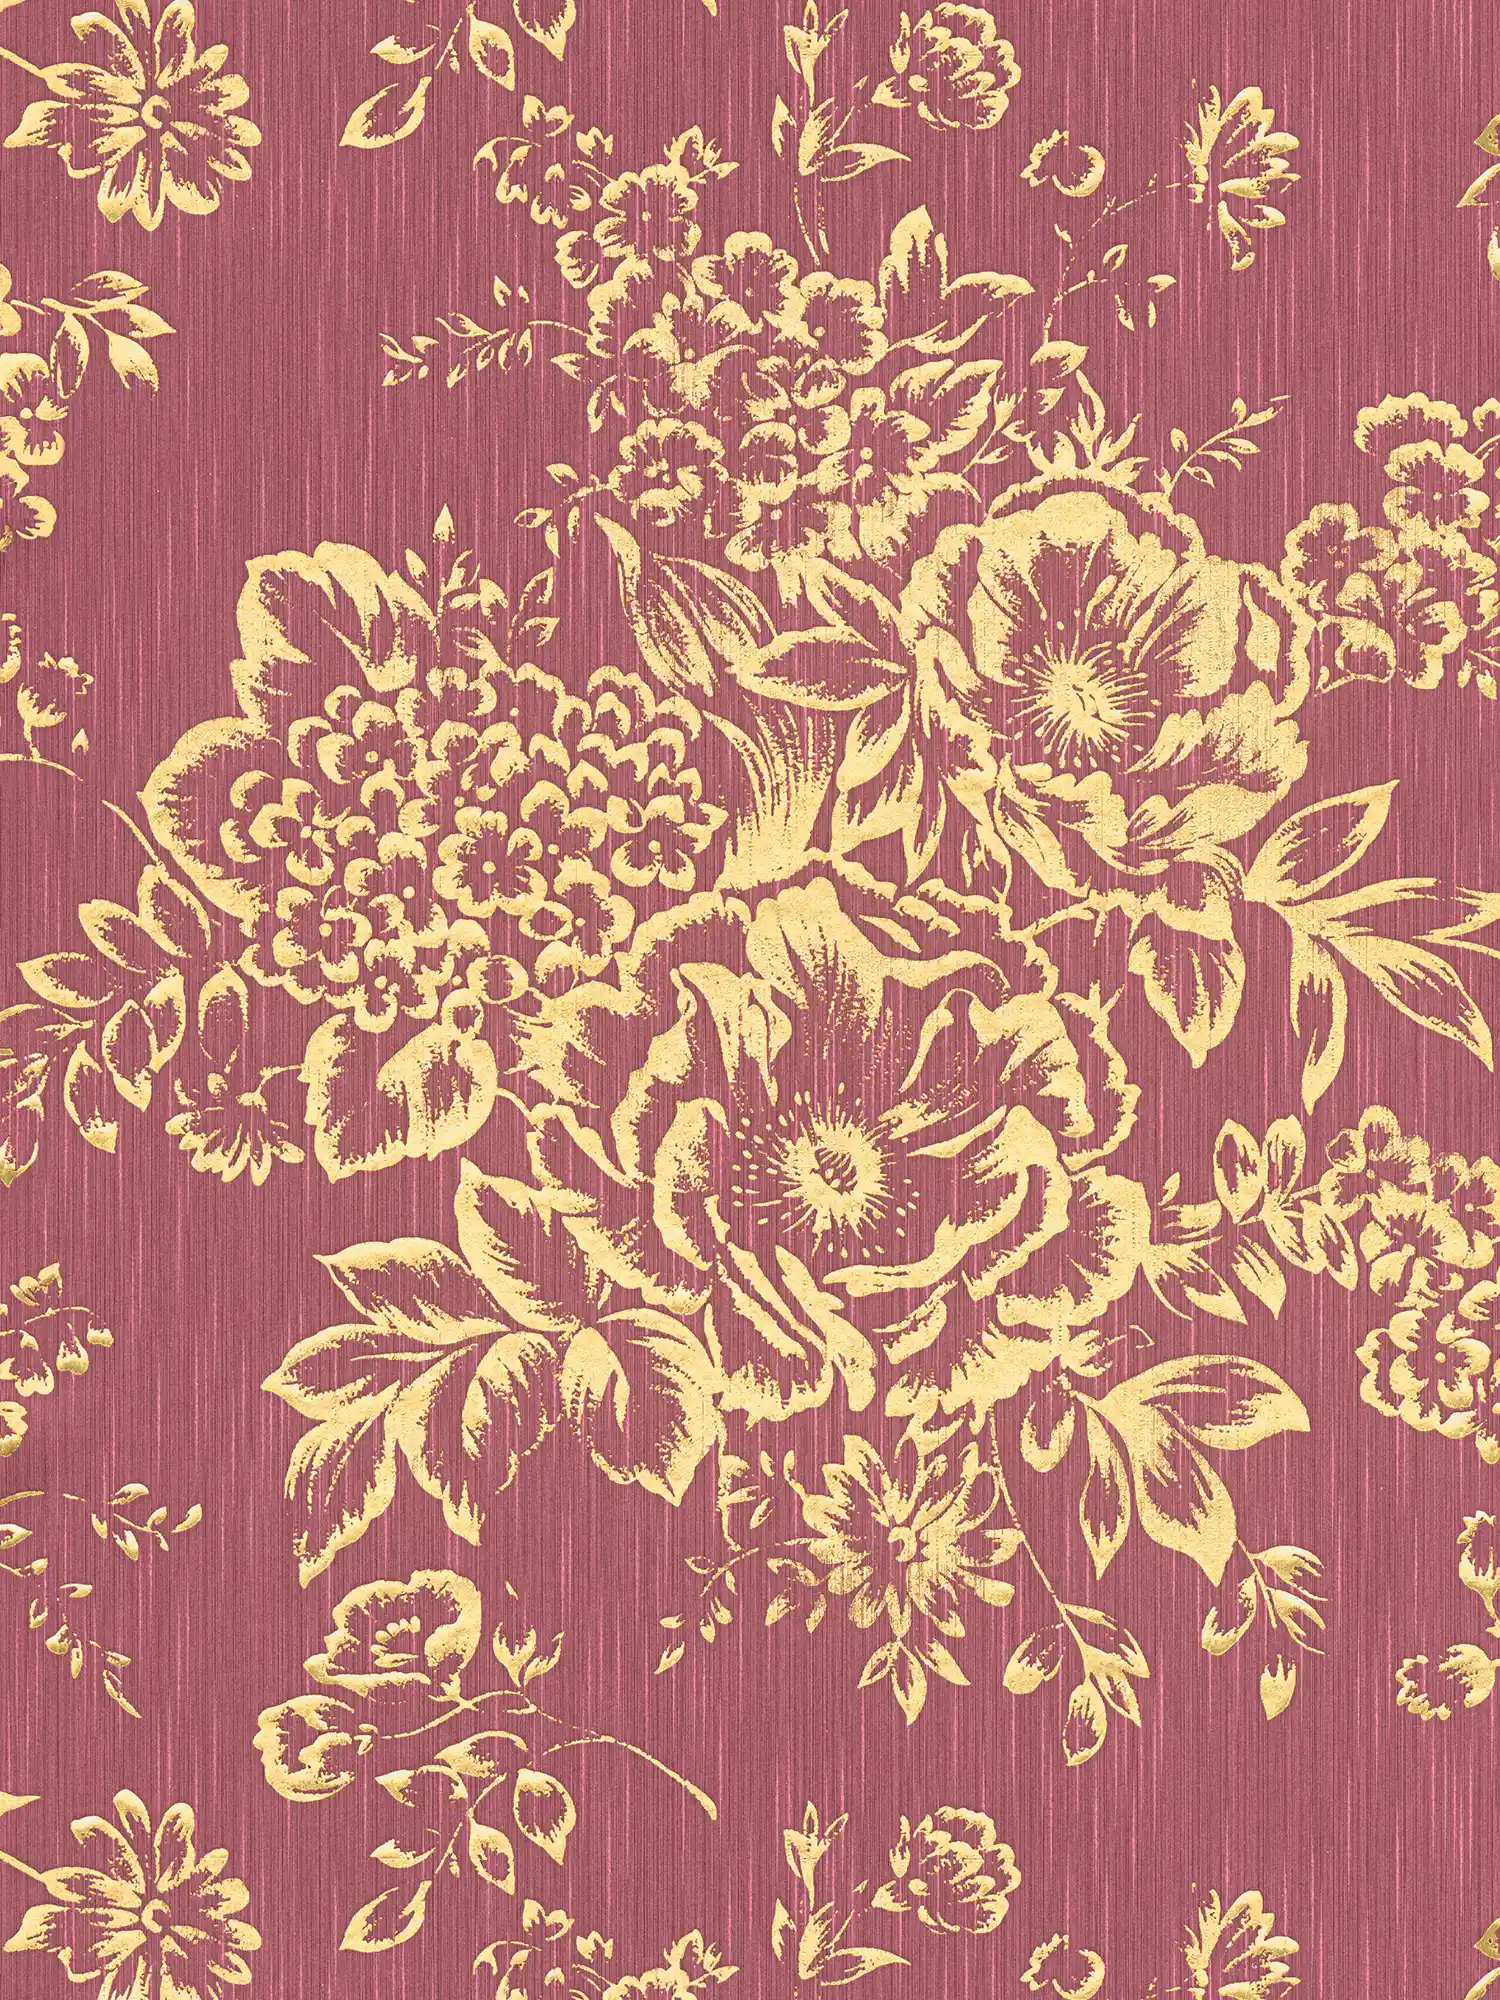 Textured wallpaper with golden floral pattern - gold, red
